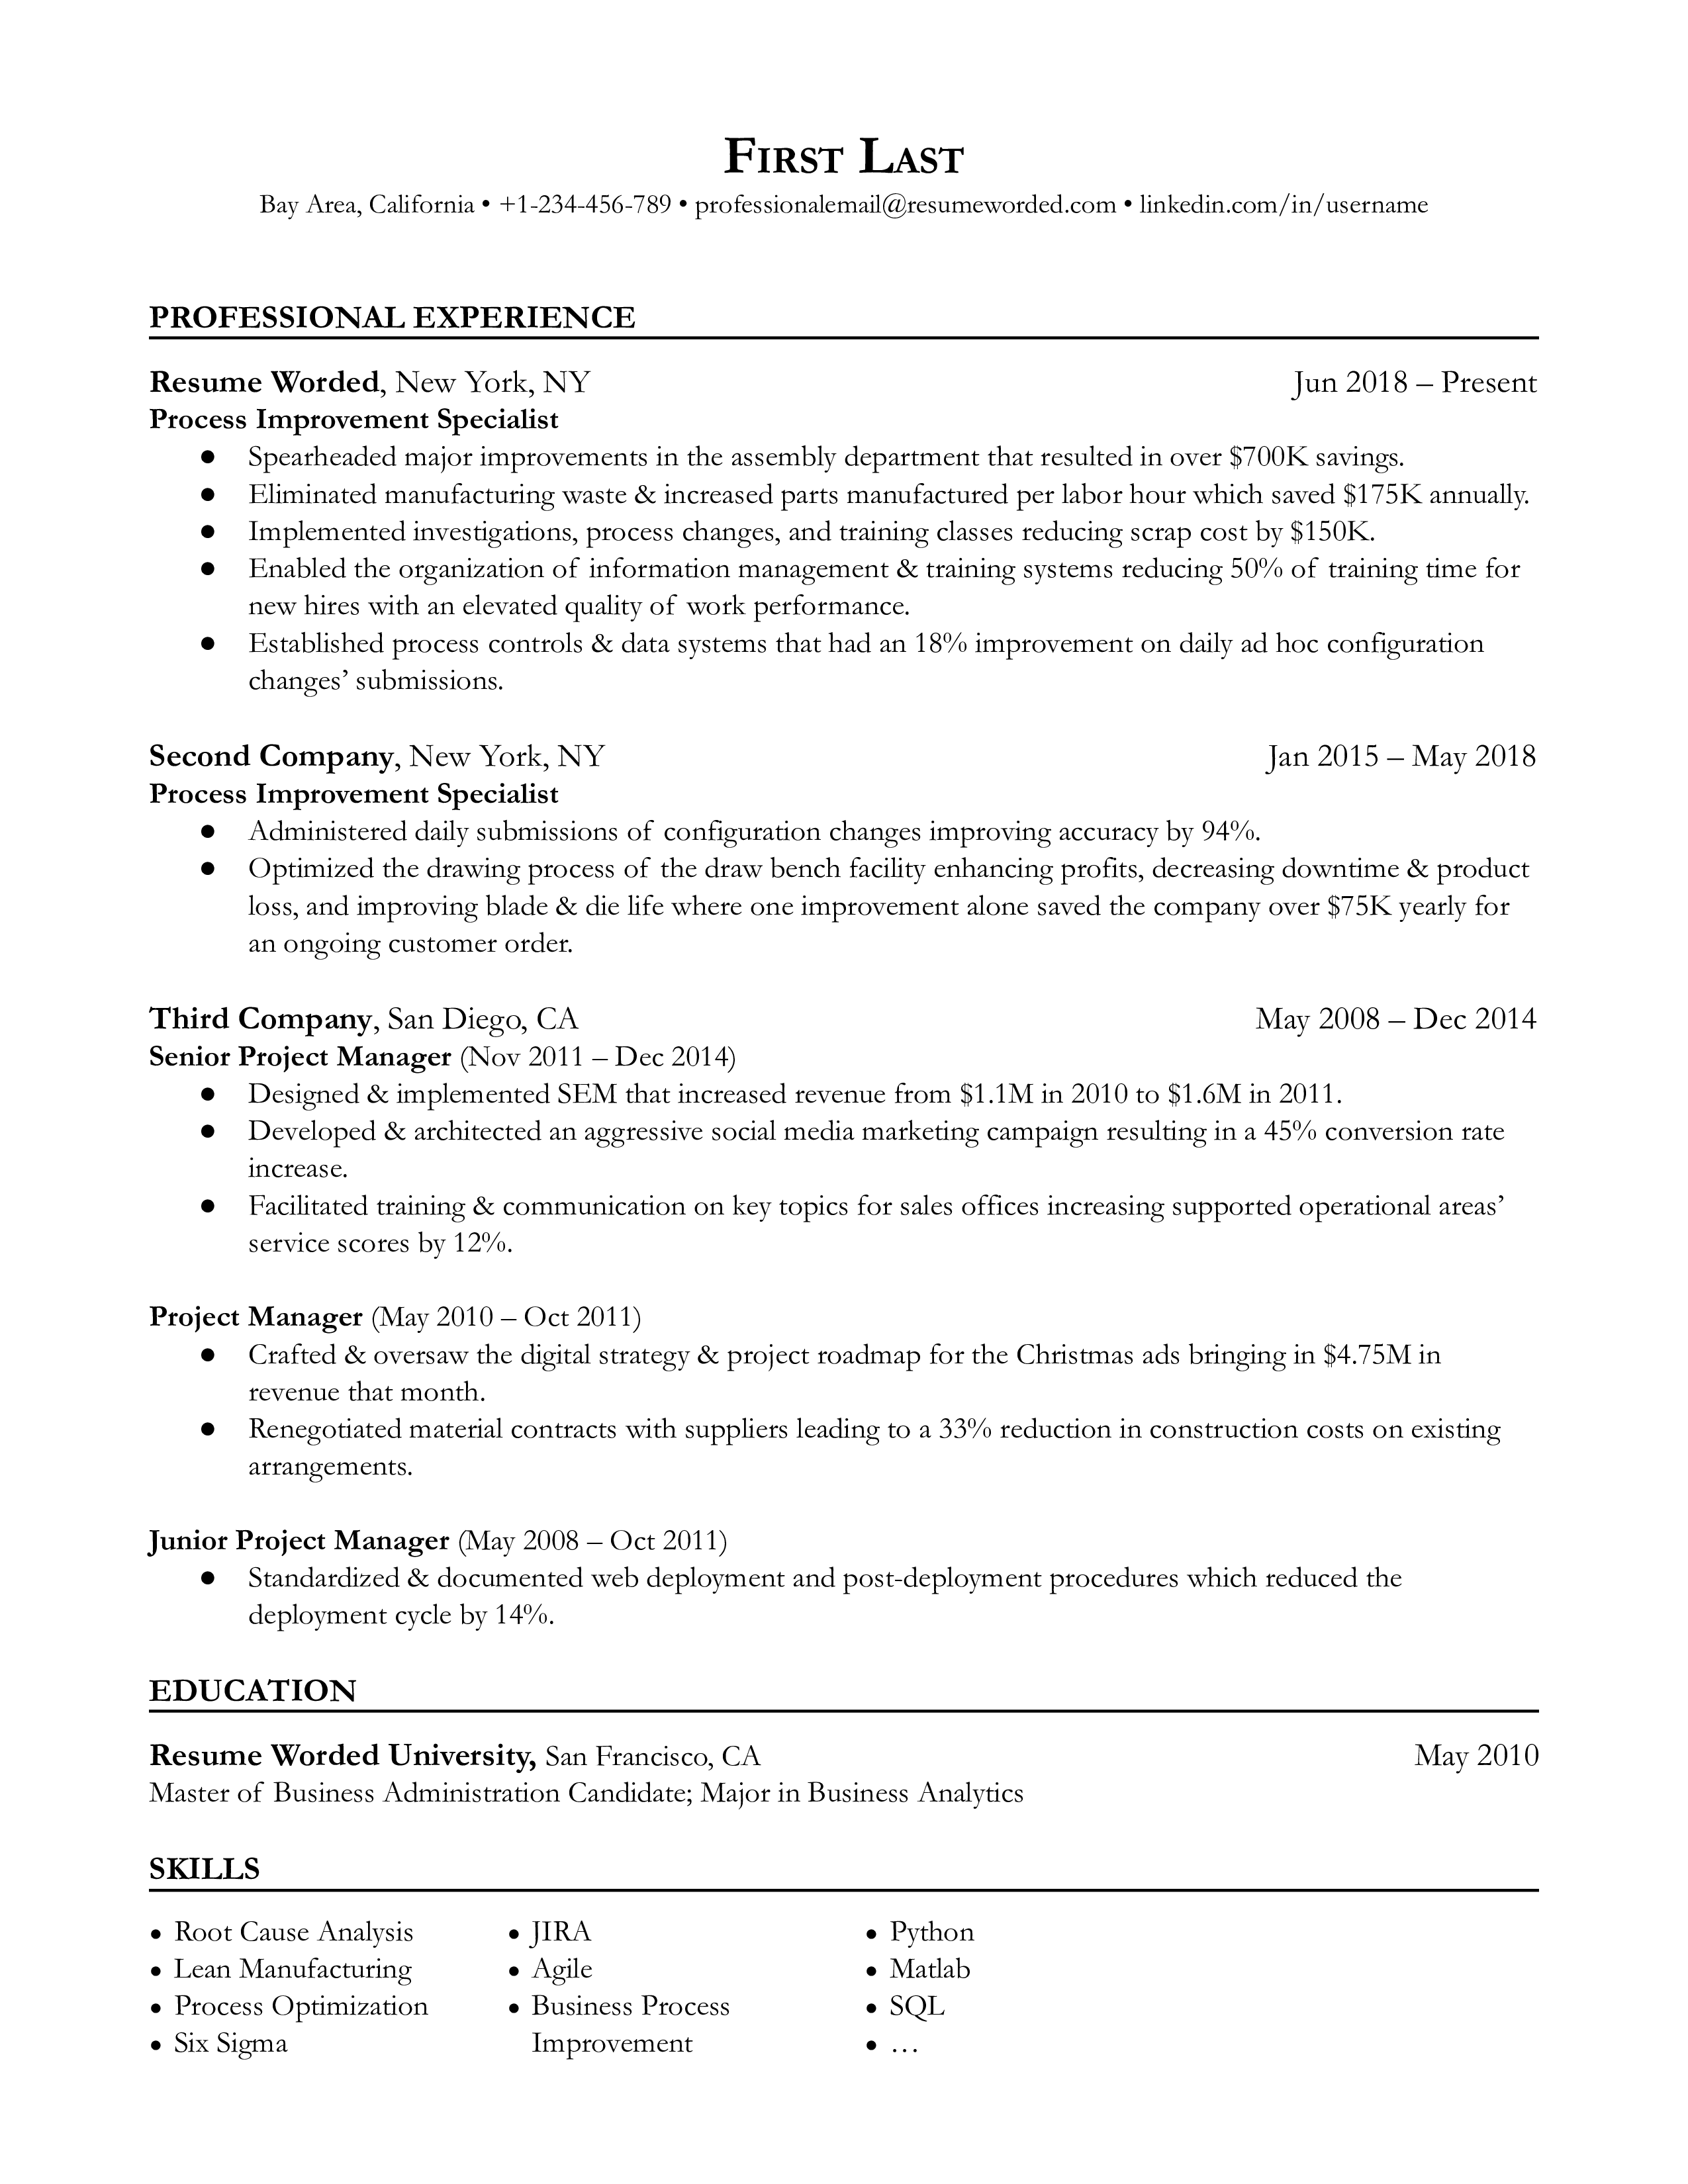 A process improvement specialist resume template that uses work experience in chronological order